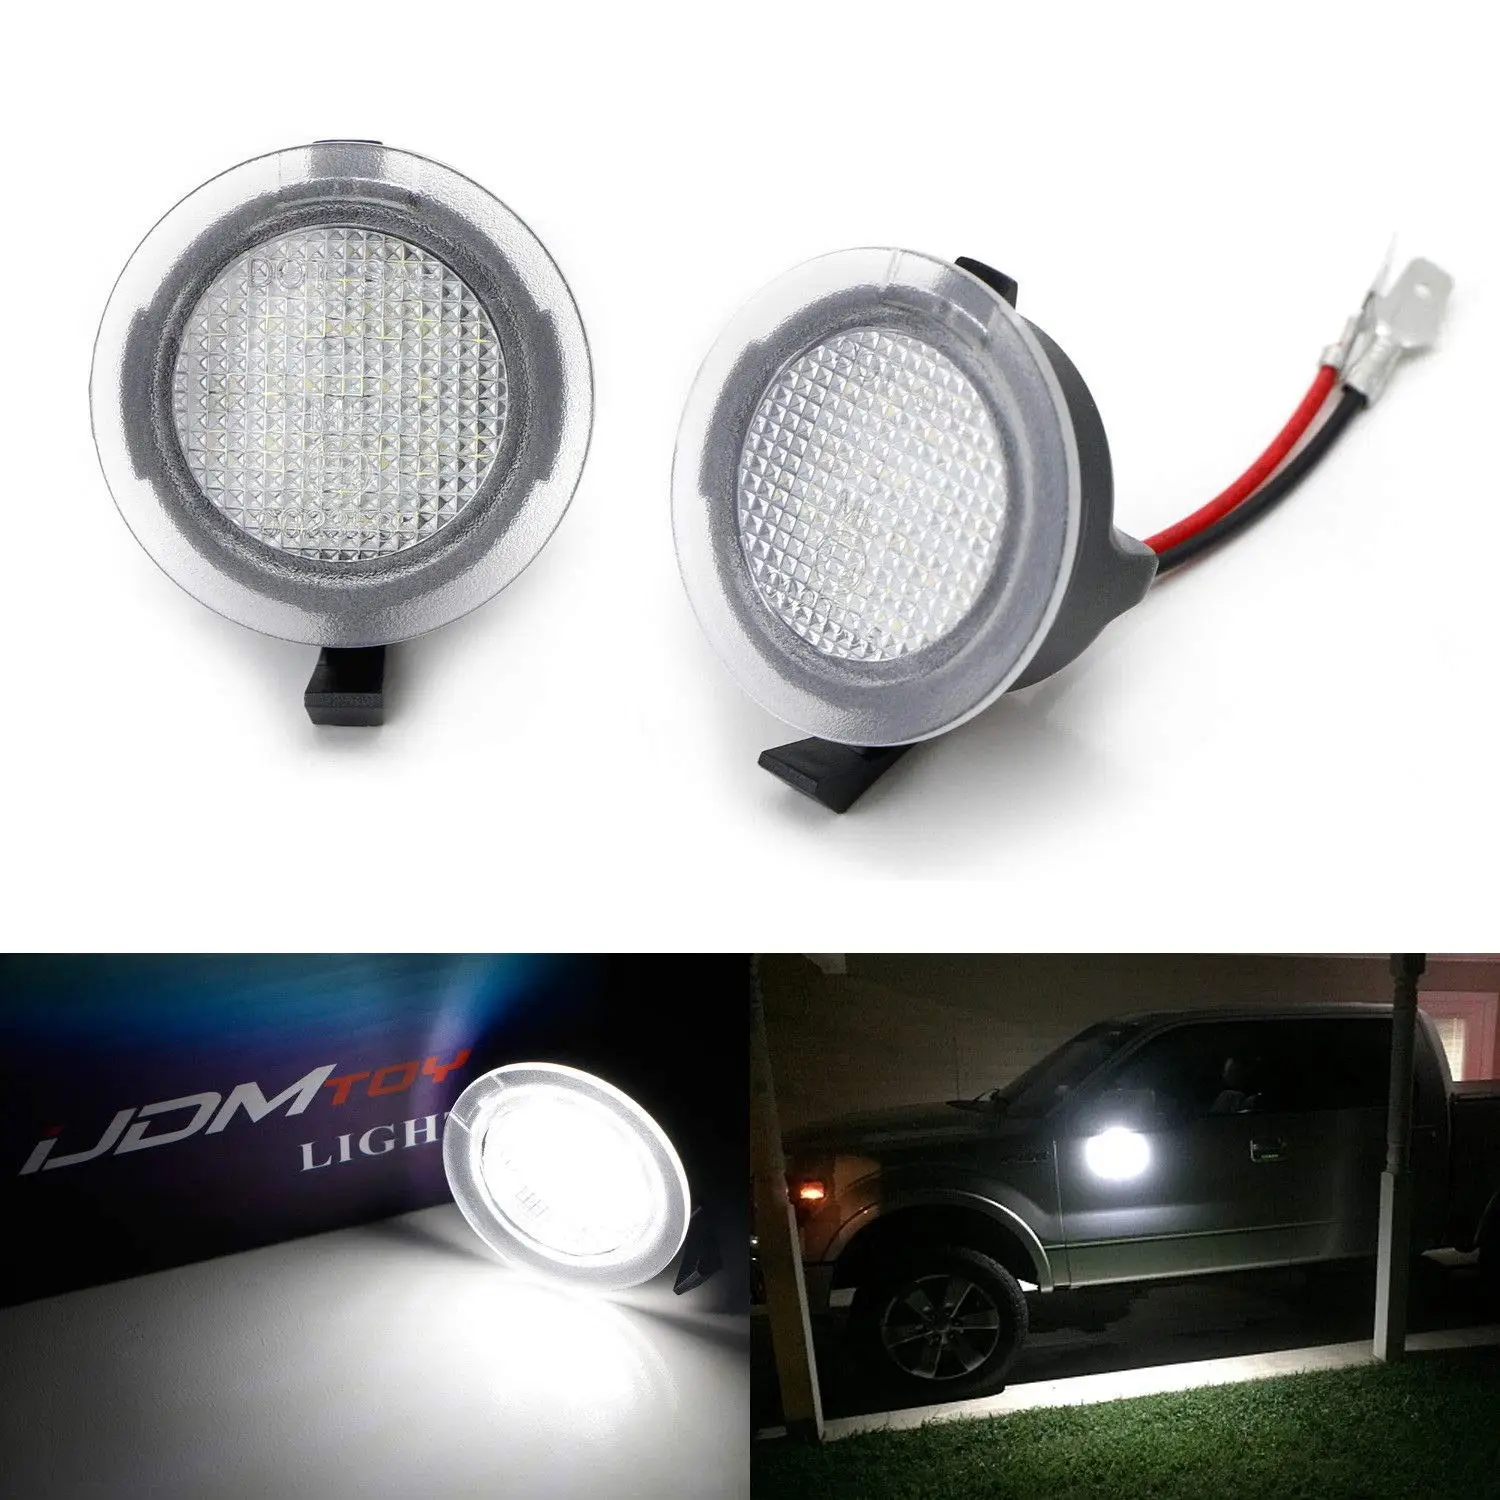 

2PC White LED Under Side Mirror Puddle Lights Compatible for Ford F150 Mondeo MK5 Edge Fusion Explorer Flex Taurus Mustang Light